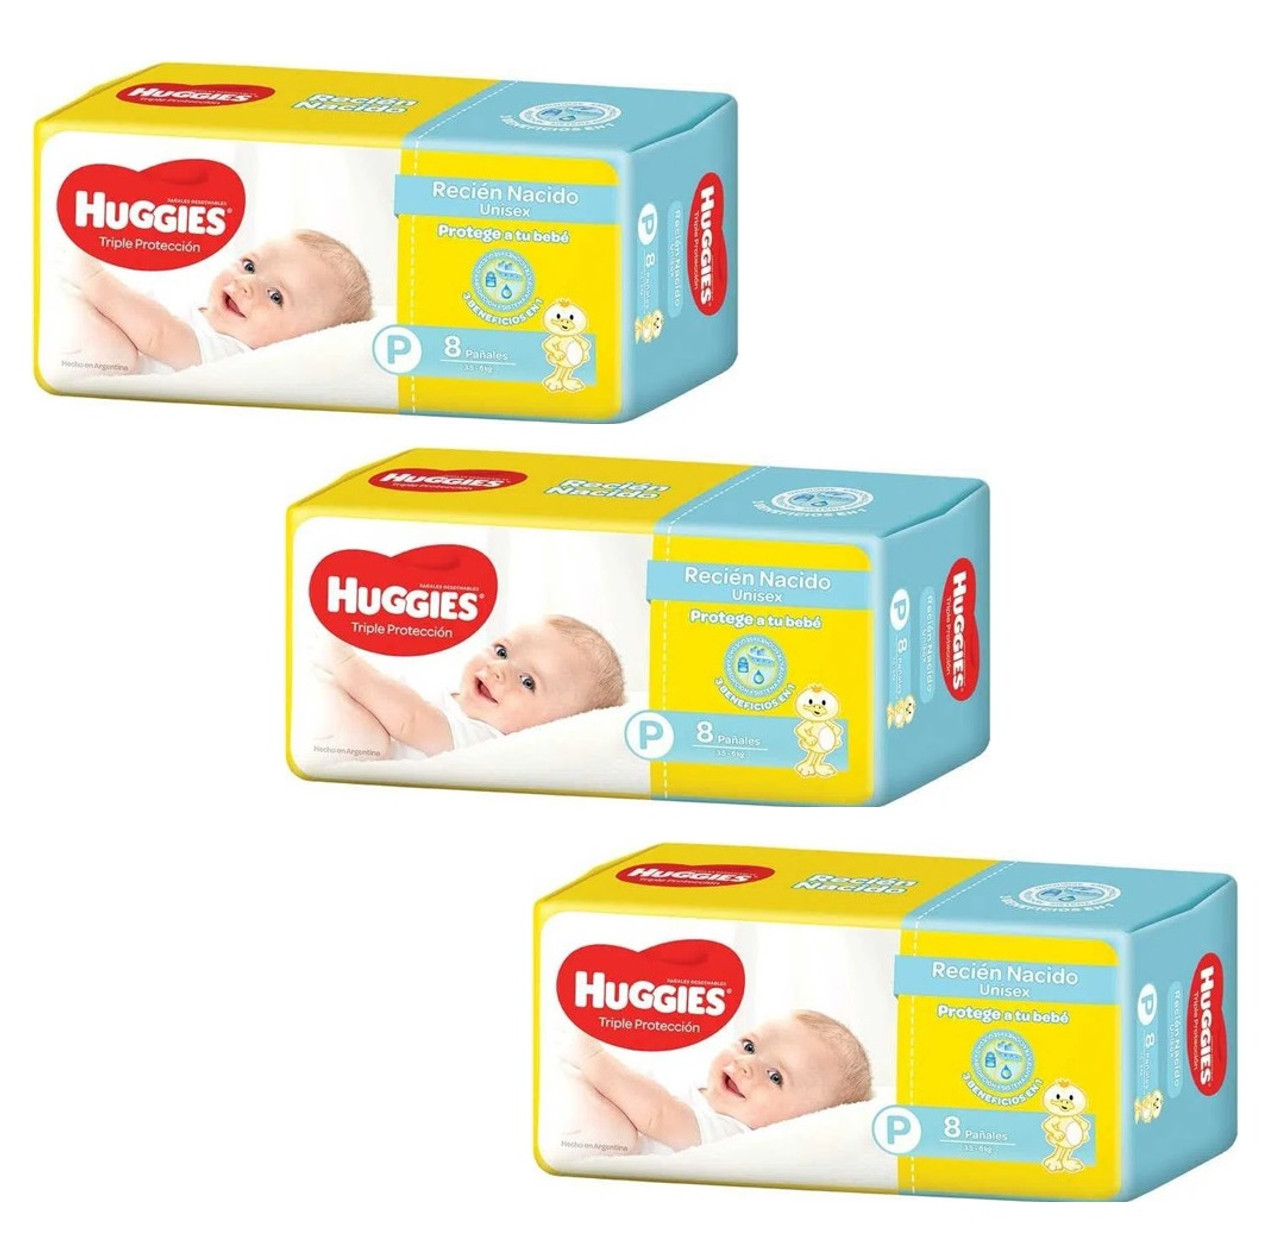 Huggies Pañales Recién Nacido Baby Diapers Size Newborn Disposable Baby  Diapers Triple Protection S/1, 3